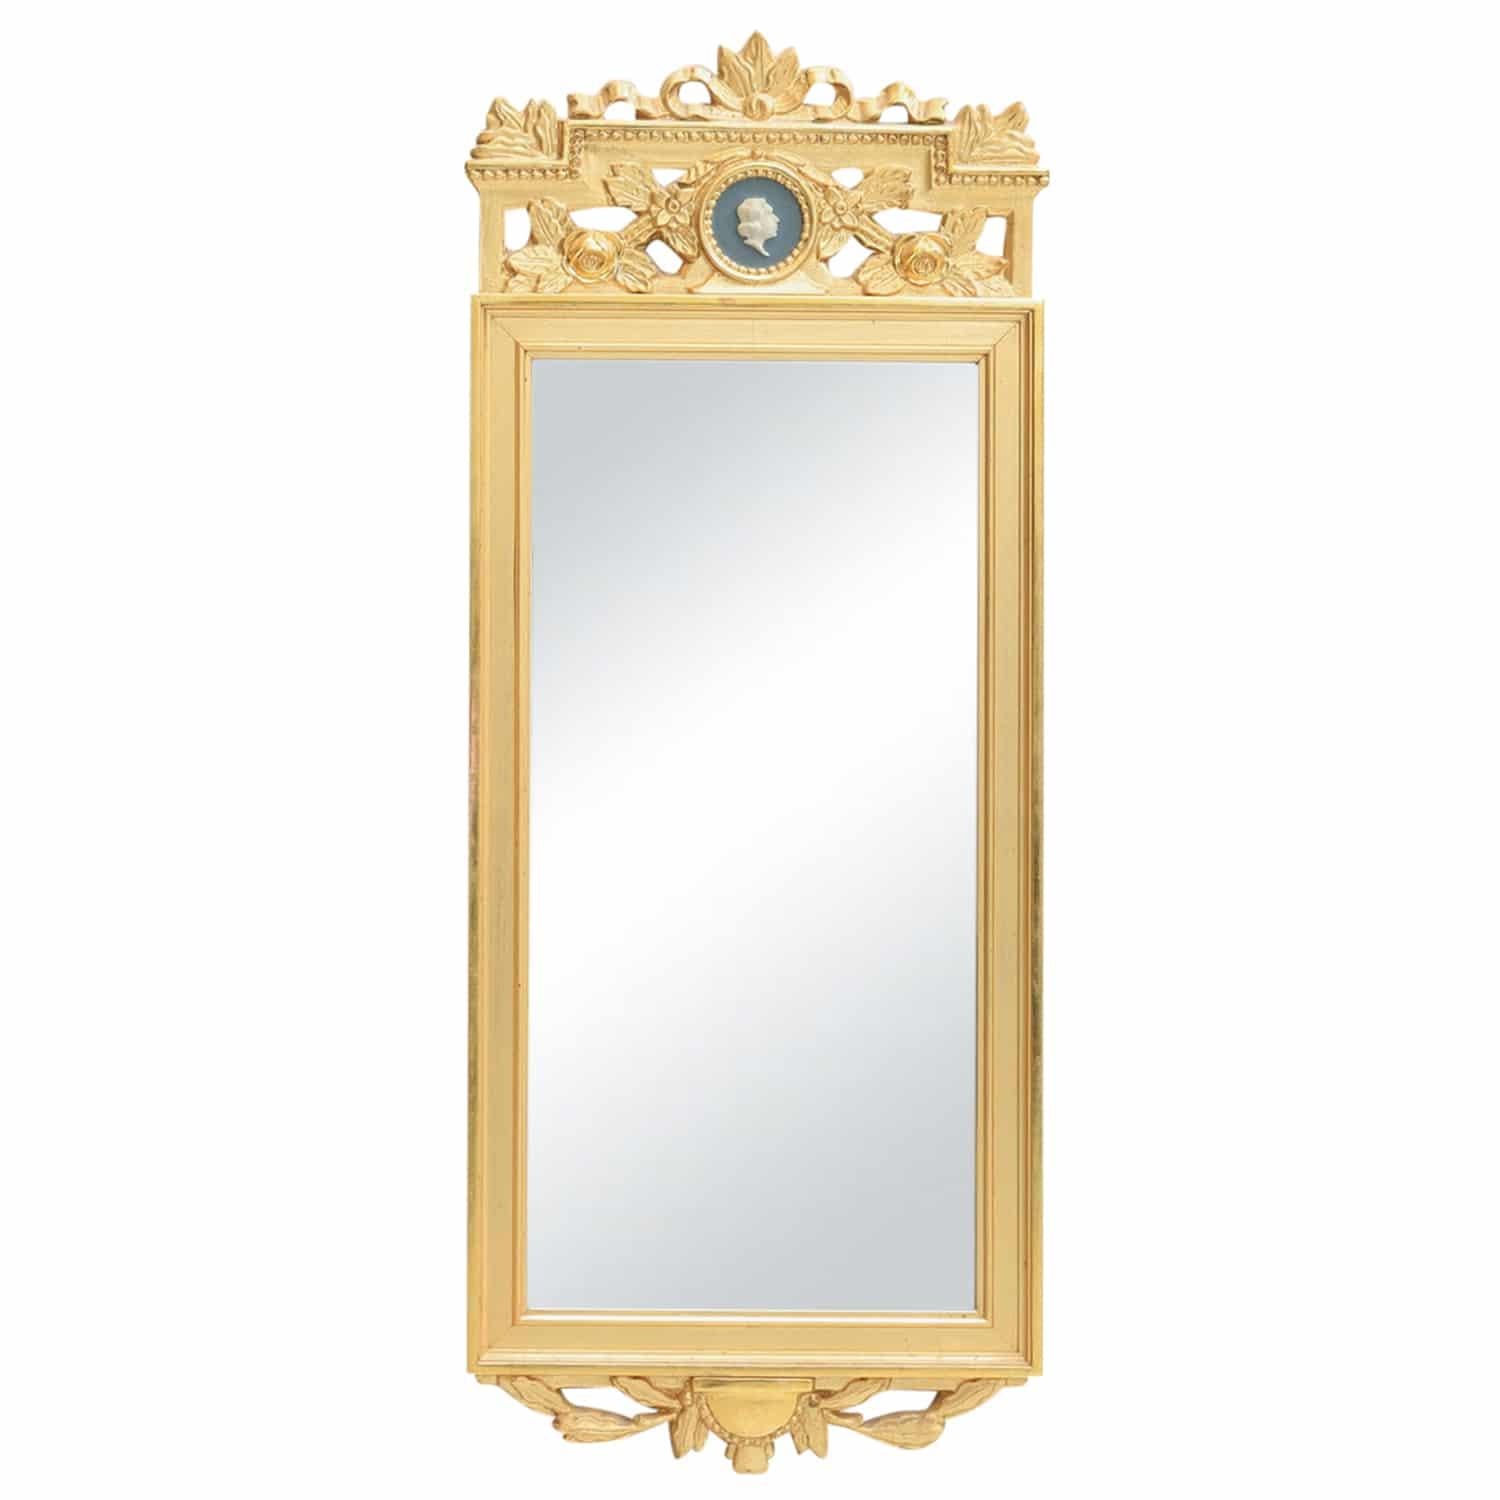 A gold, antique Swedish Gustavian wall mirror made of handcrafted gilded Pinewood with its original mirrored glass, in good condition. The particularized carved Scandinavian wall décor piece is enhanced by detailed wood carvings and fittings,